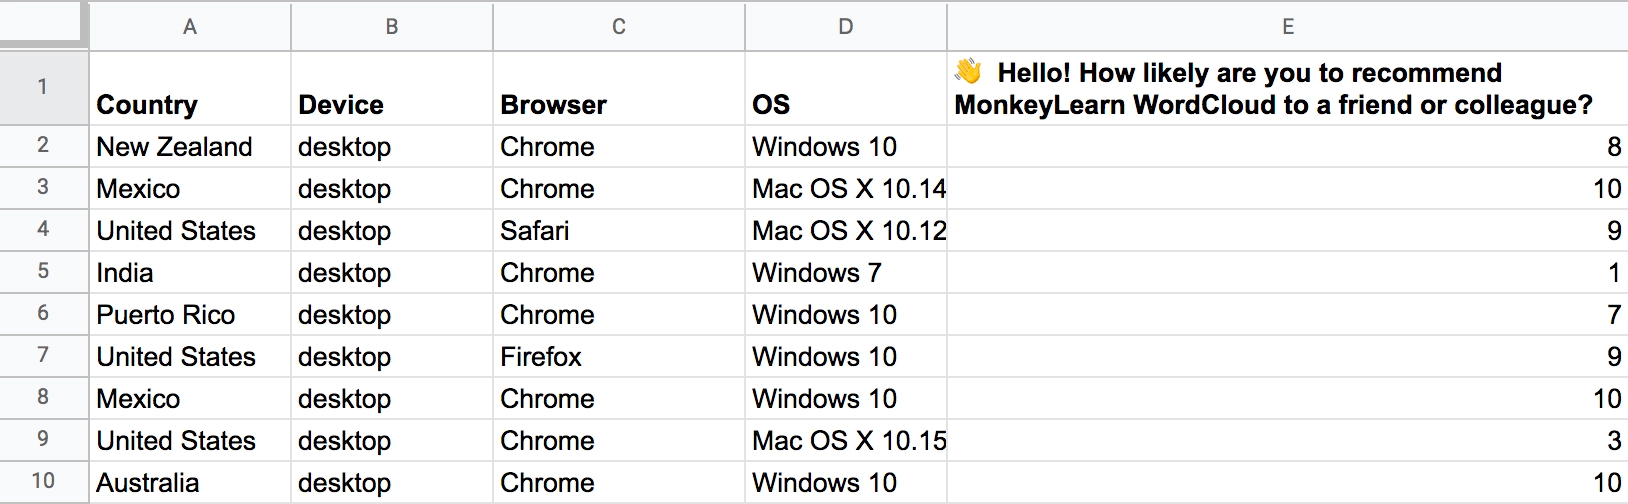 Spreadsheet showing NPS survey data by country, device, browser, and OS, and NPS score. The NPS question asks 'Hello! How likely are you to recommend MonkeyLearn to a friend or colleague?'